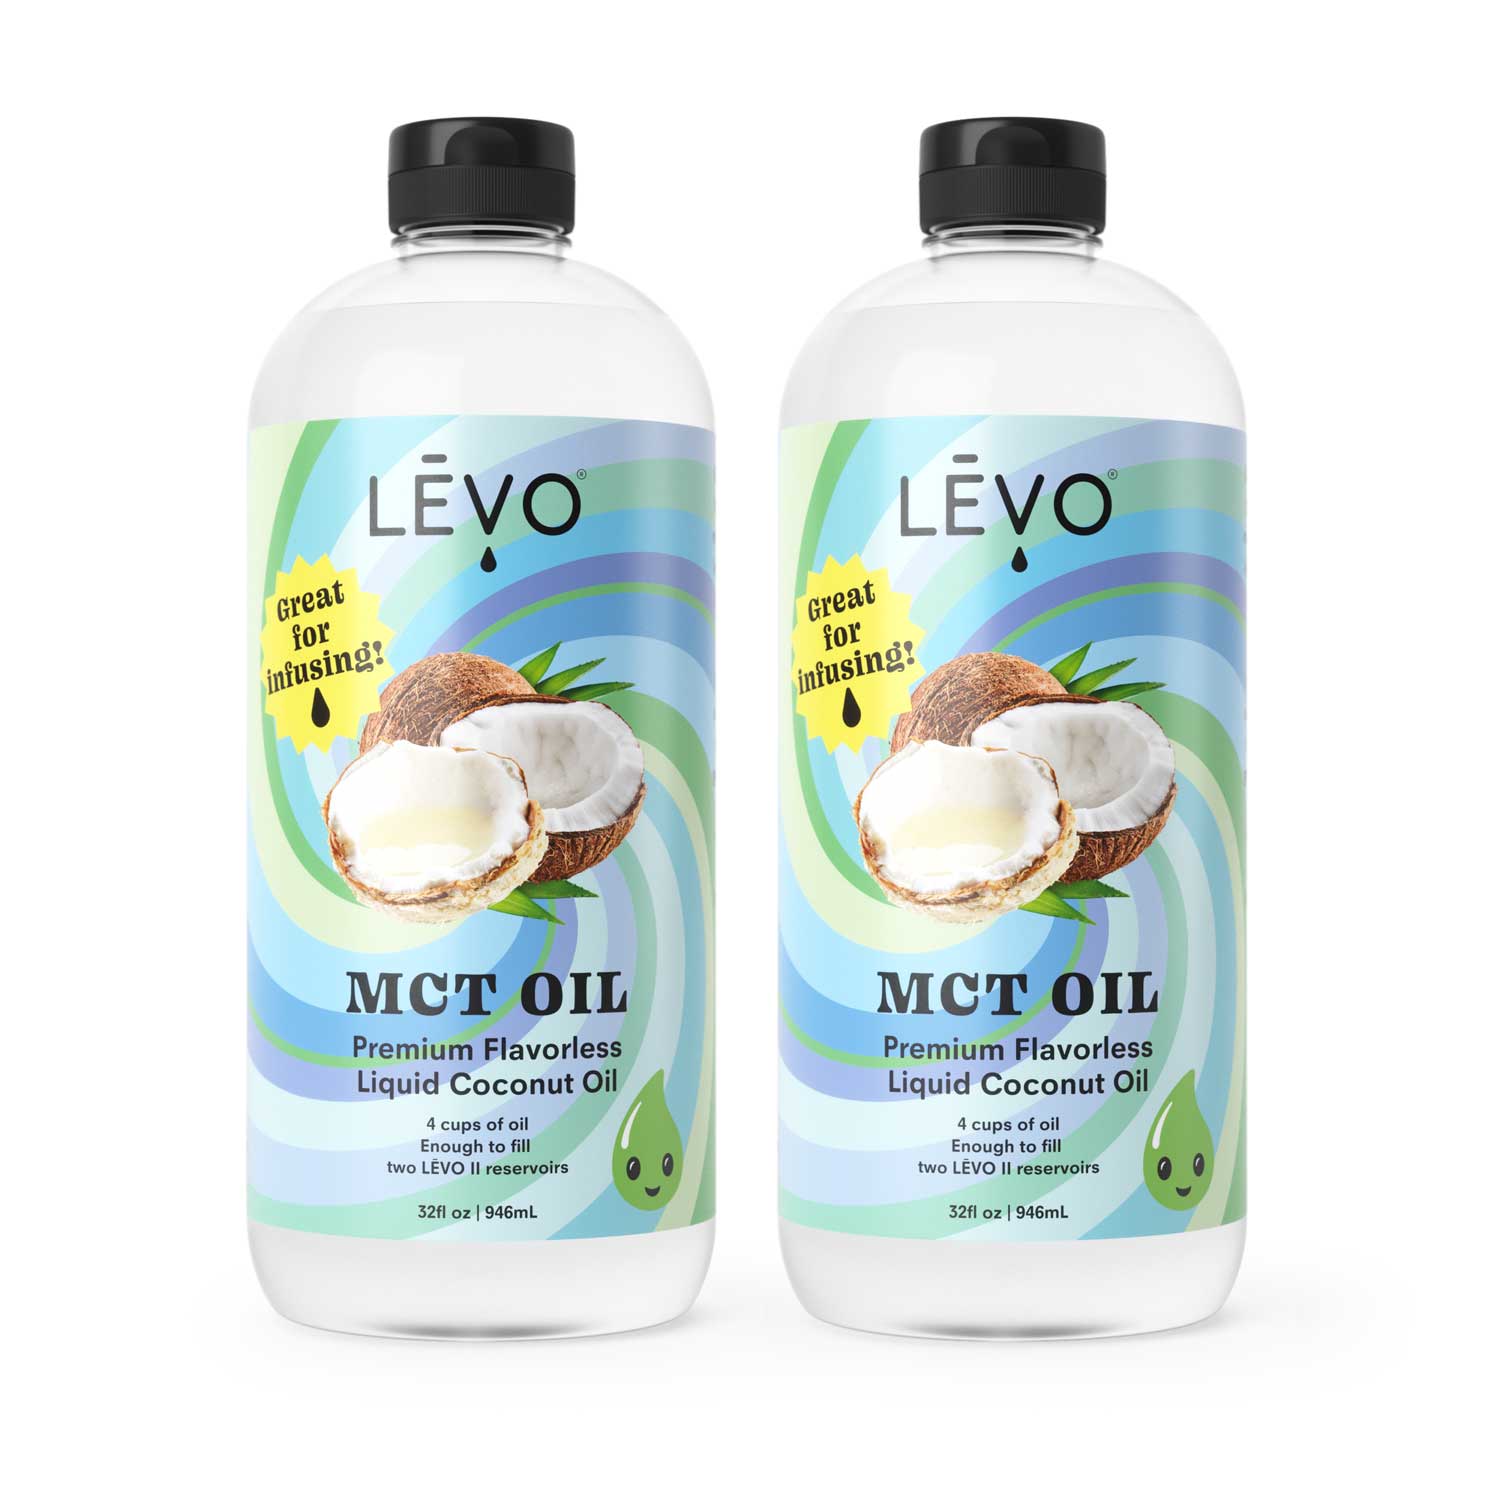 LEVO MCT Oil is a premium, flavorless liquid coconut oil. At 32 fl oz, it will fill 2 LEVO II reservoirs to capacity, 4 cups total. Great for infusing! LĒVO Premium MCT Liquid Coconut Oil: A versatile infusion oil for gummies, baked goods, and beverages.